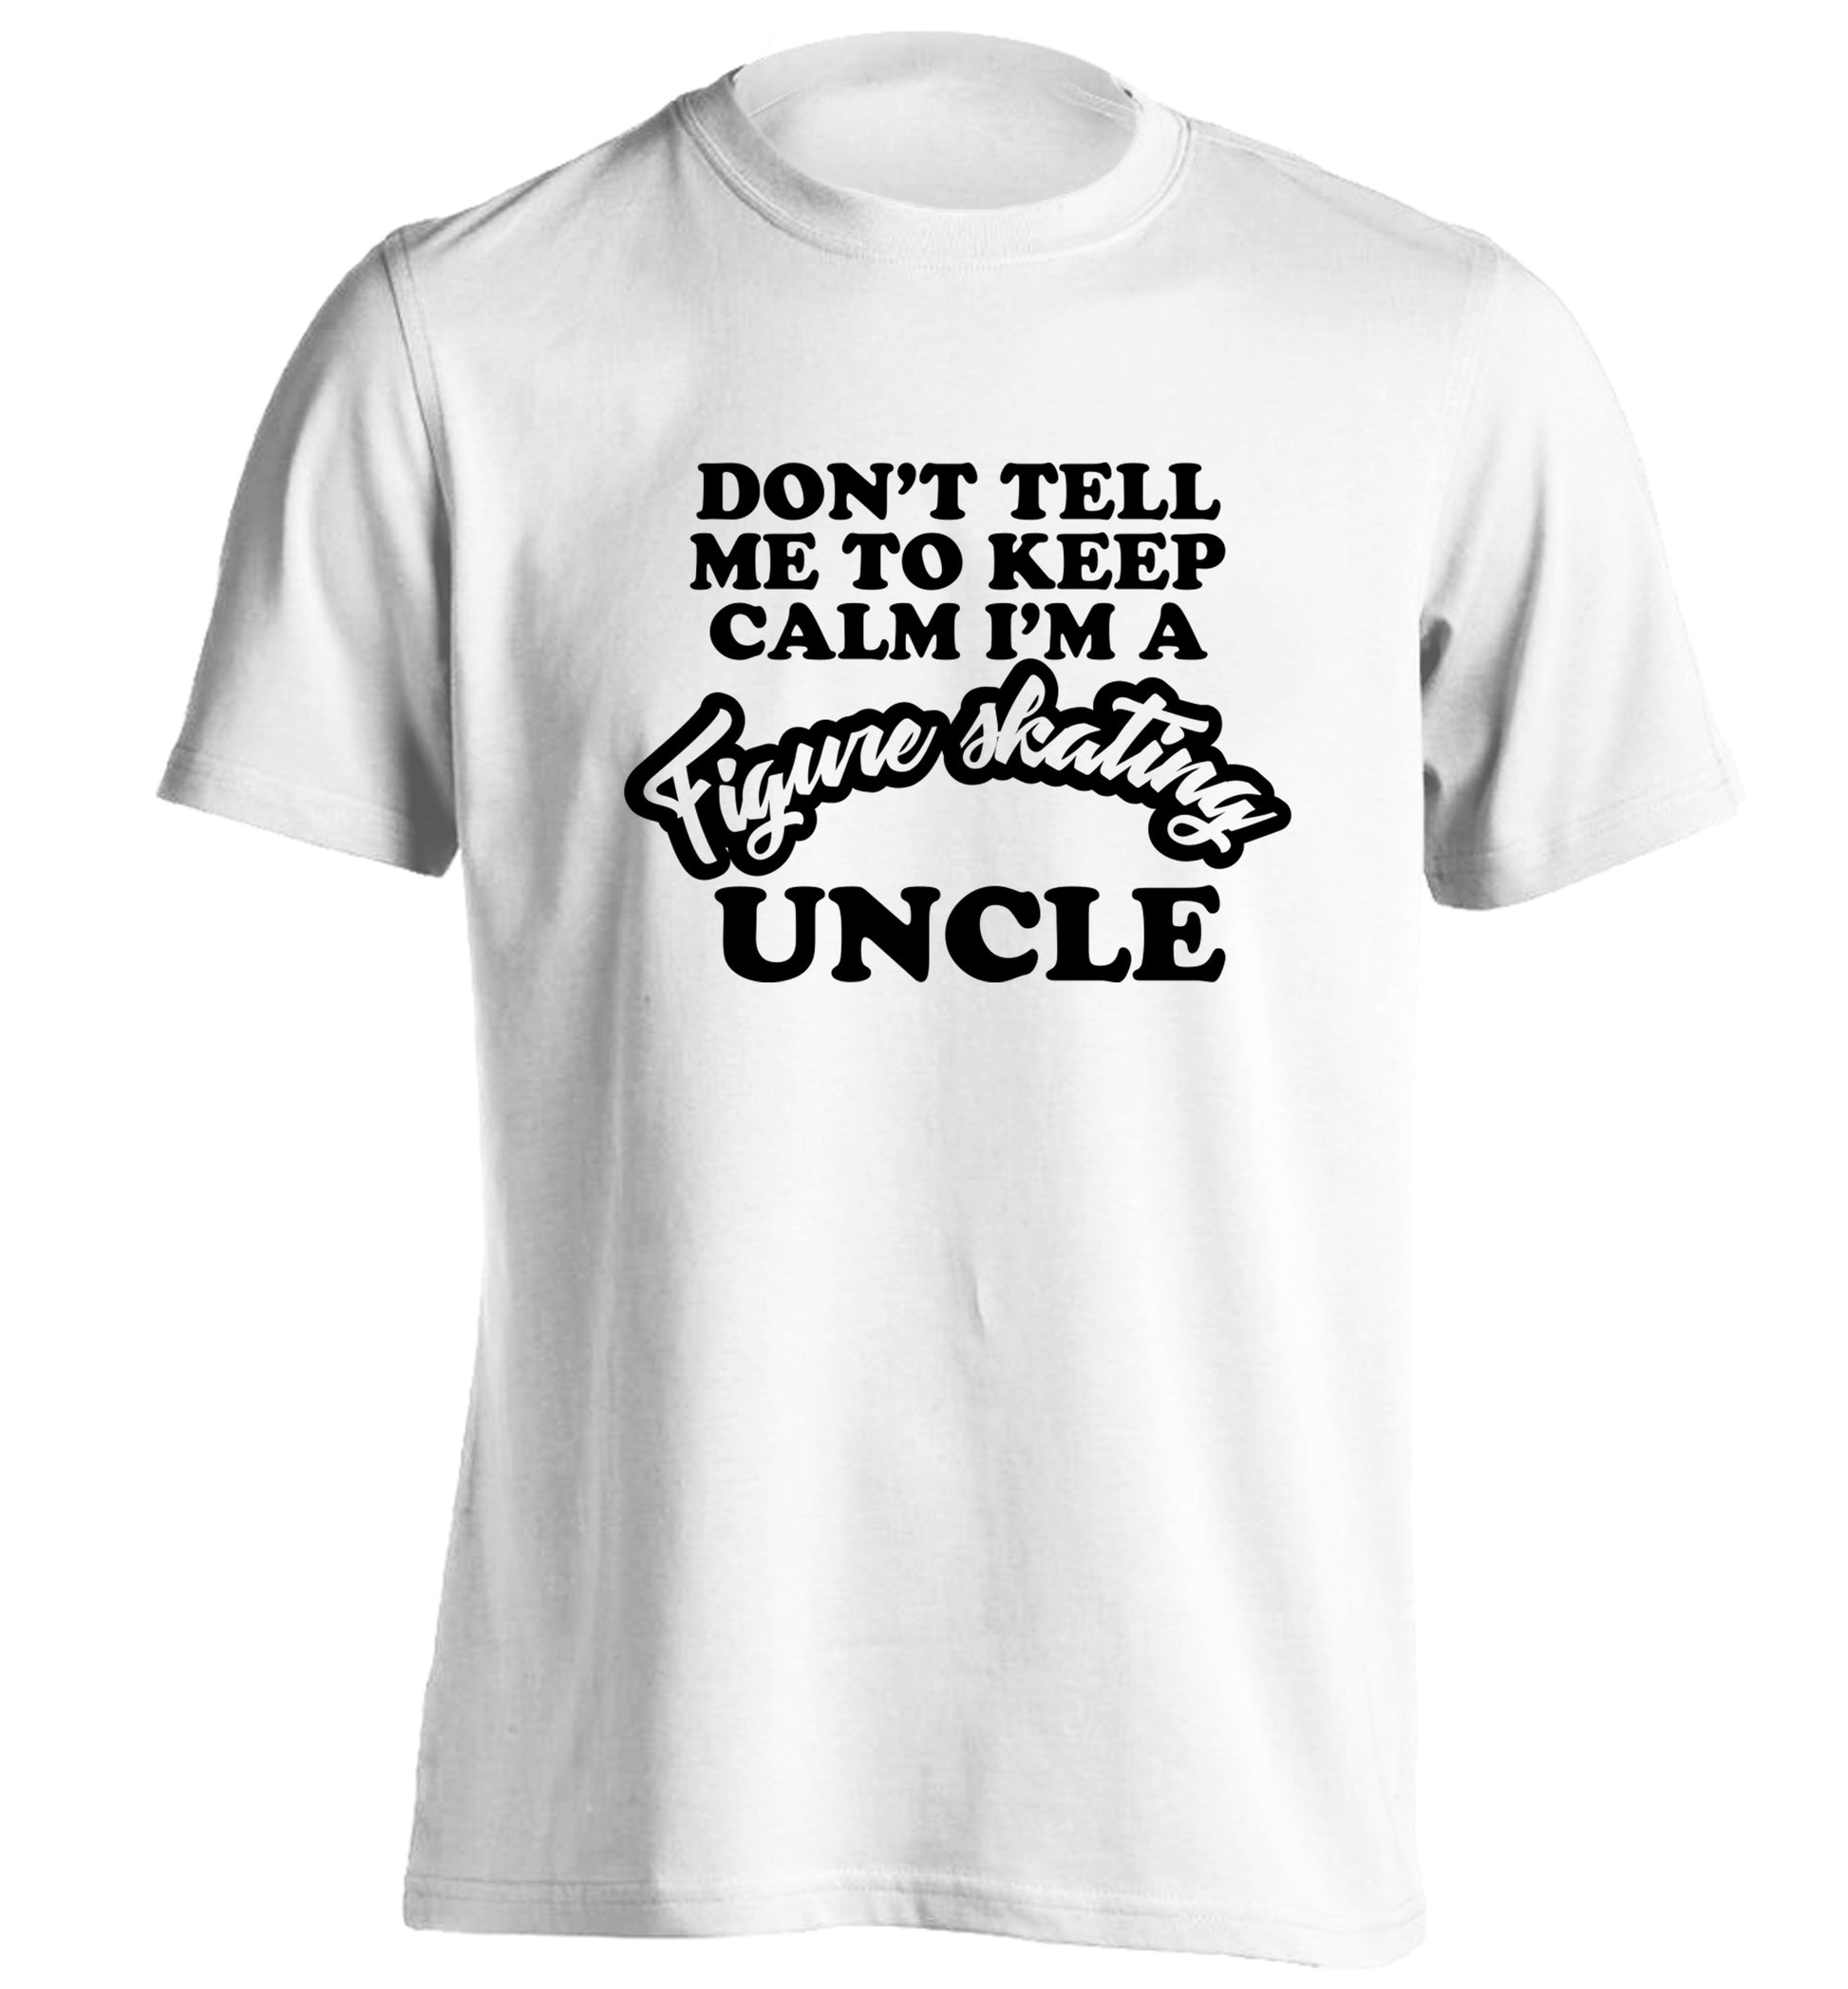 Don't tell me to keep calm I'm a figure skating uncle adults unisexwhite Tshirt 2XL